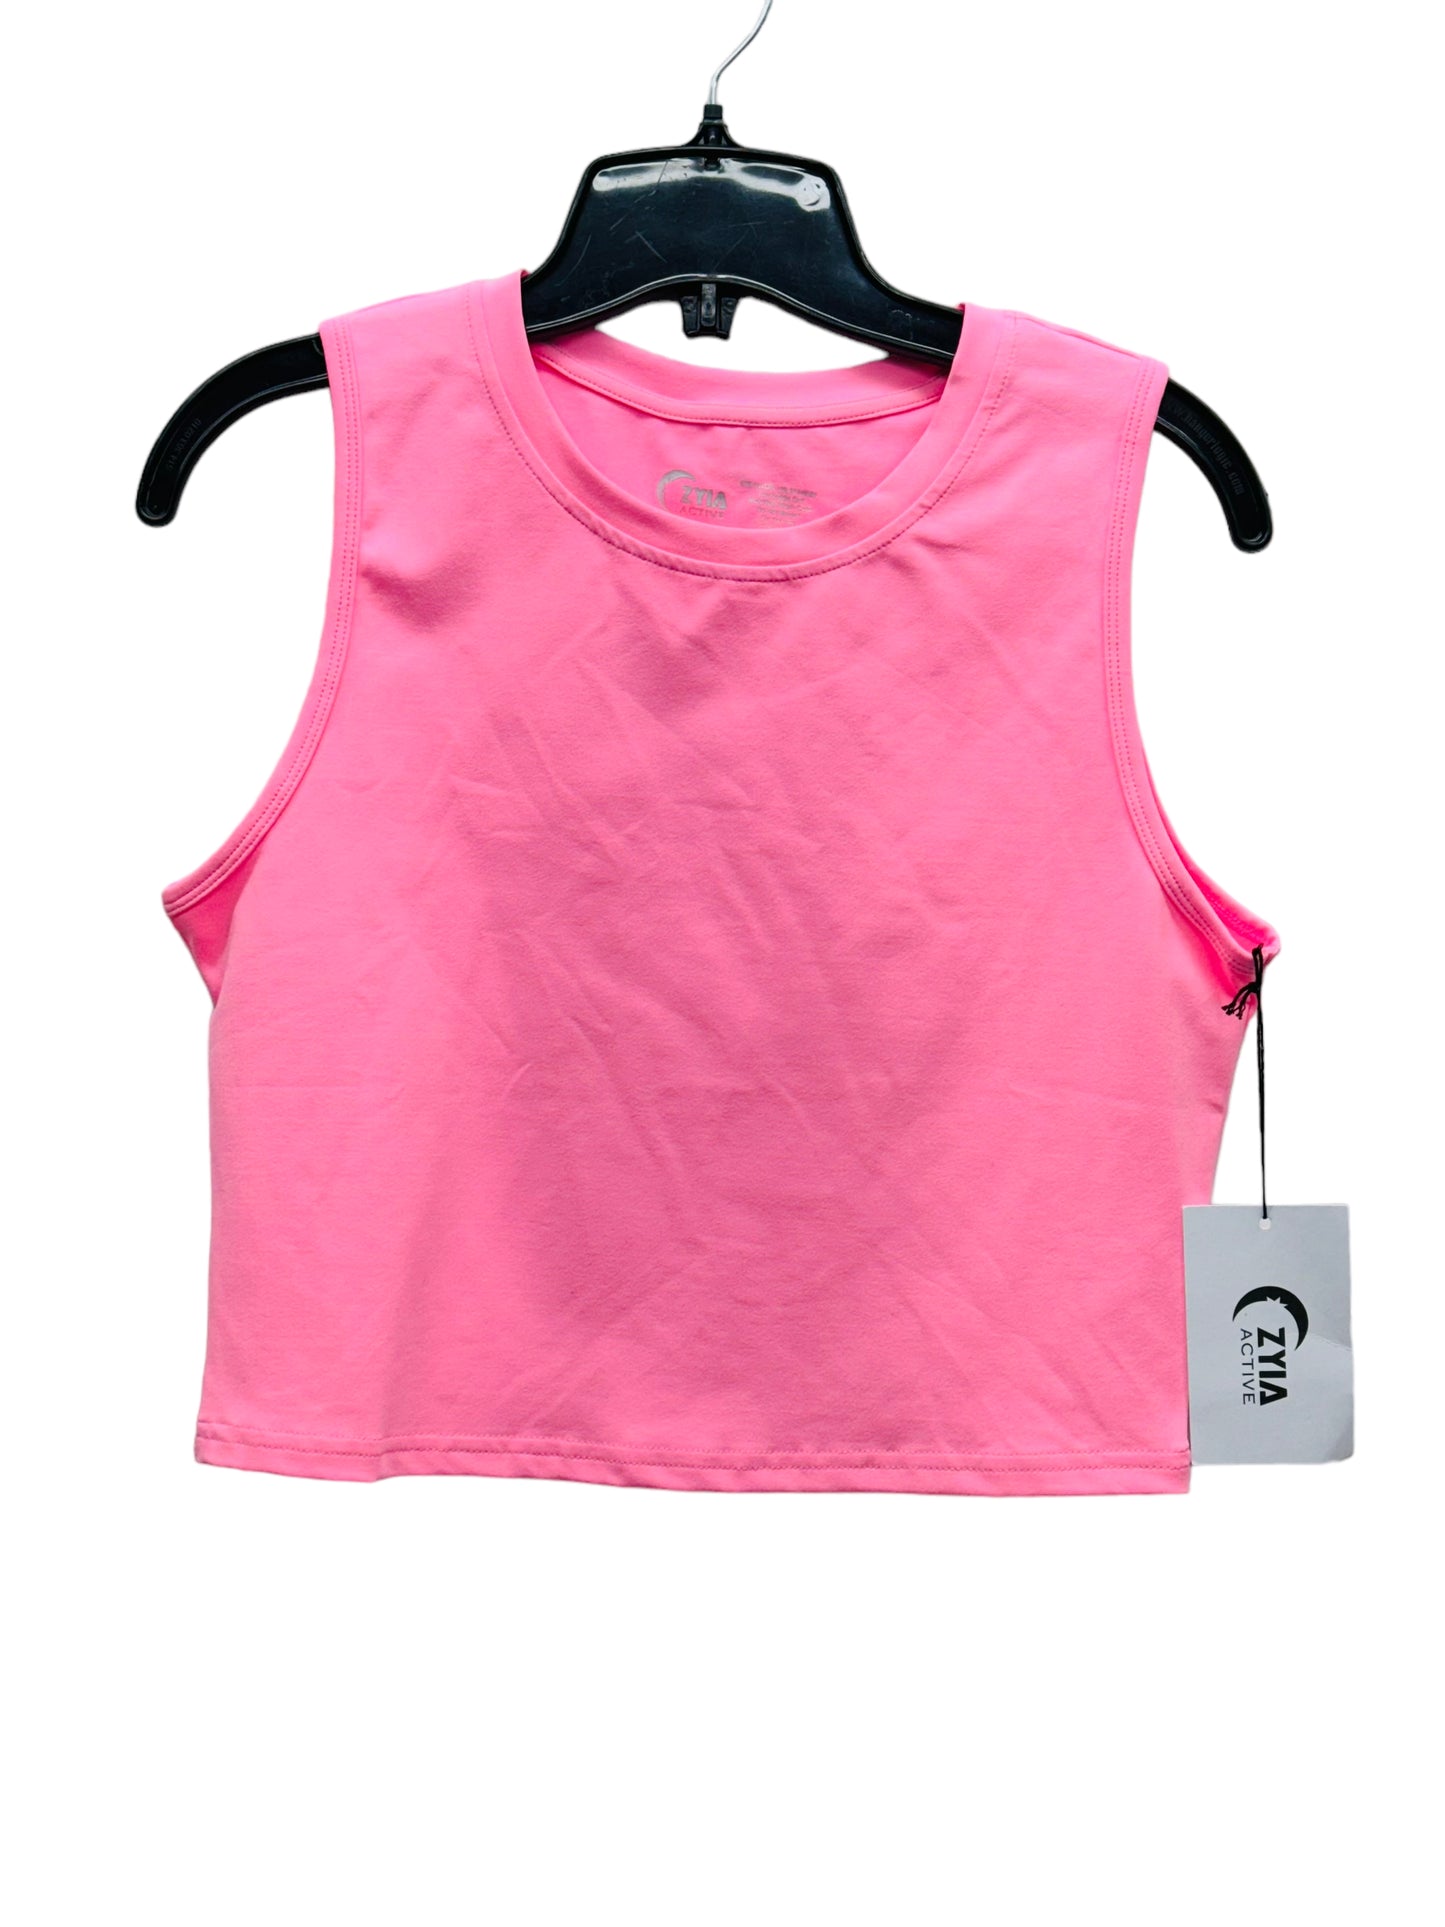 Zyia Active Women’s Sleeveless Shirt Sports Stretchable Top Pink - Size XL